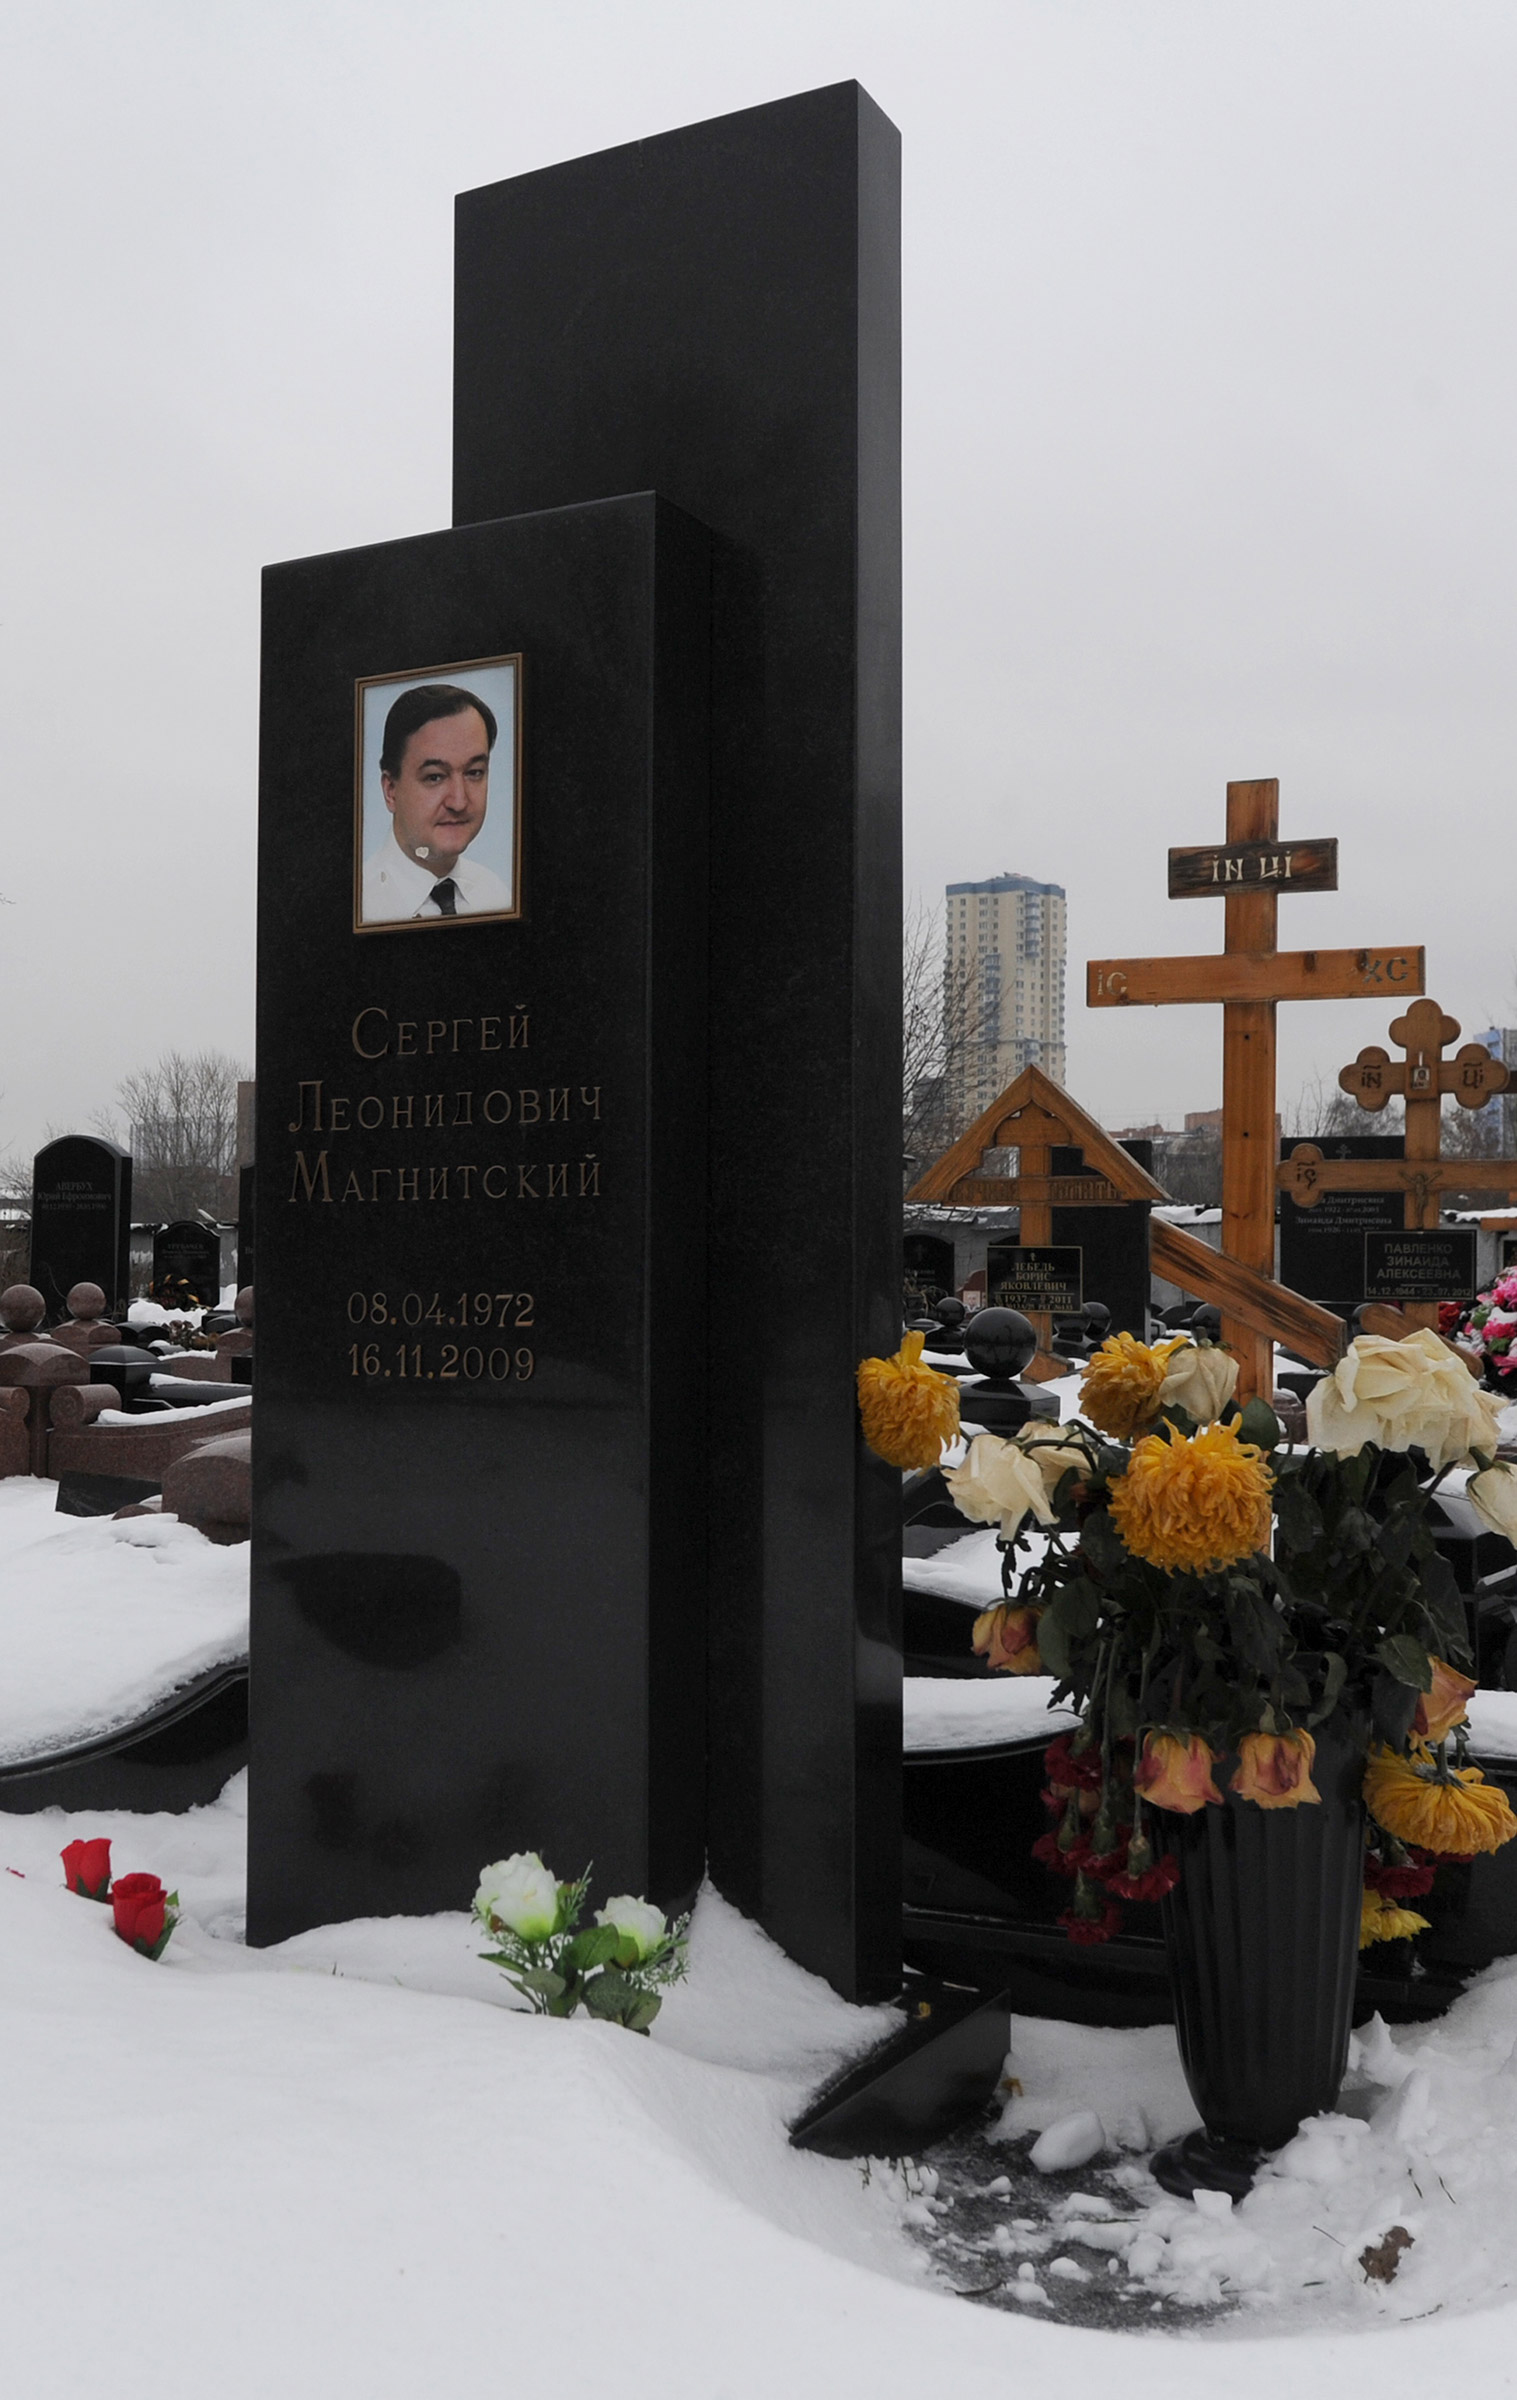 The grave of Russian lawyer Sergei Magnitsky at the Preobrazhenskoye cemetery in Moscow on Dec. 7, 2012. (Andrey Smirnov—AFP/Getty Images)